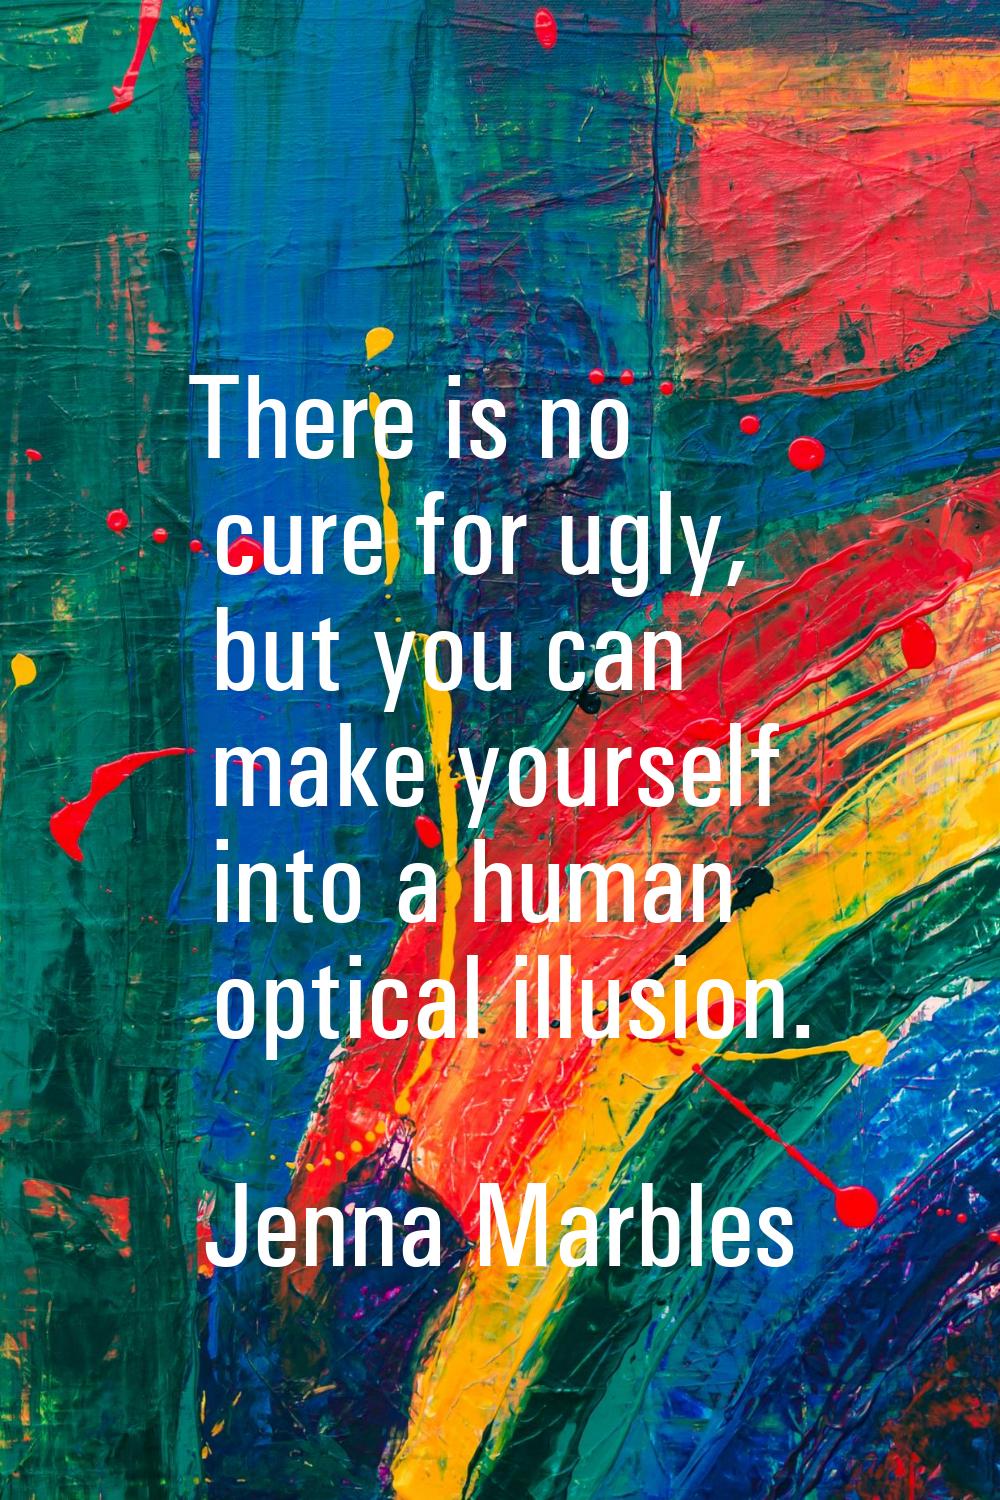 There is no cure for ugly, but you can make yourself into a human optical illusion.